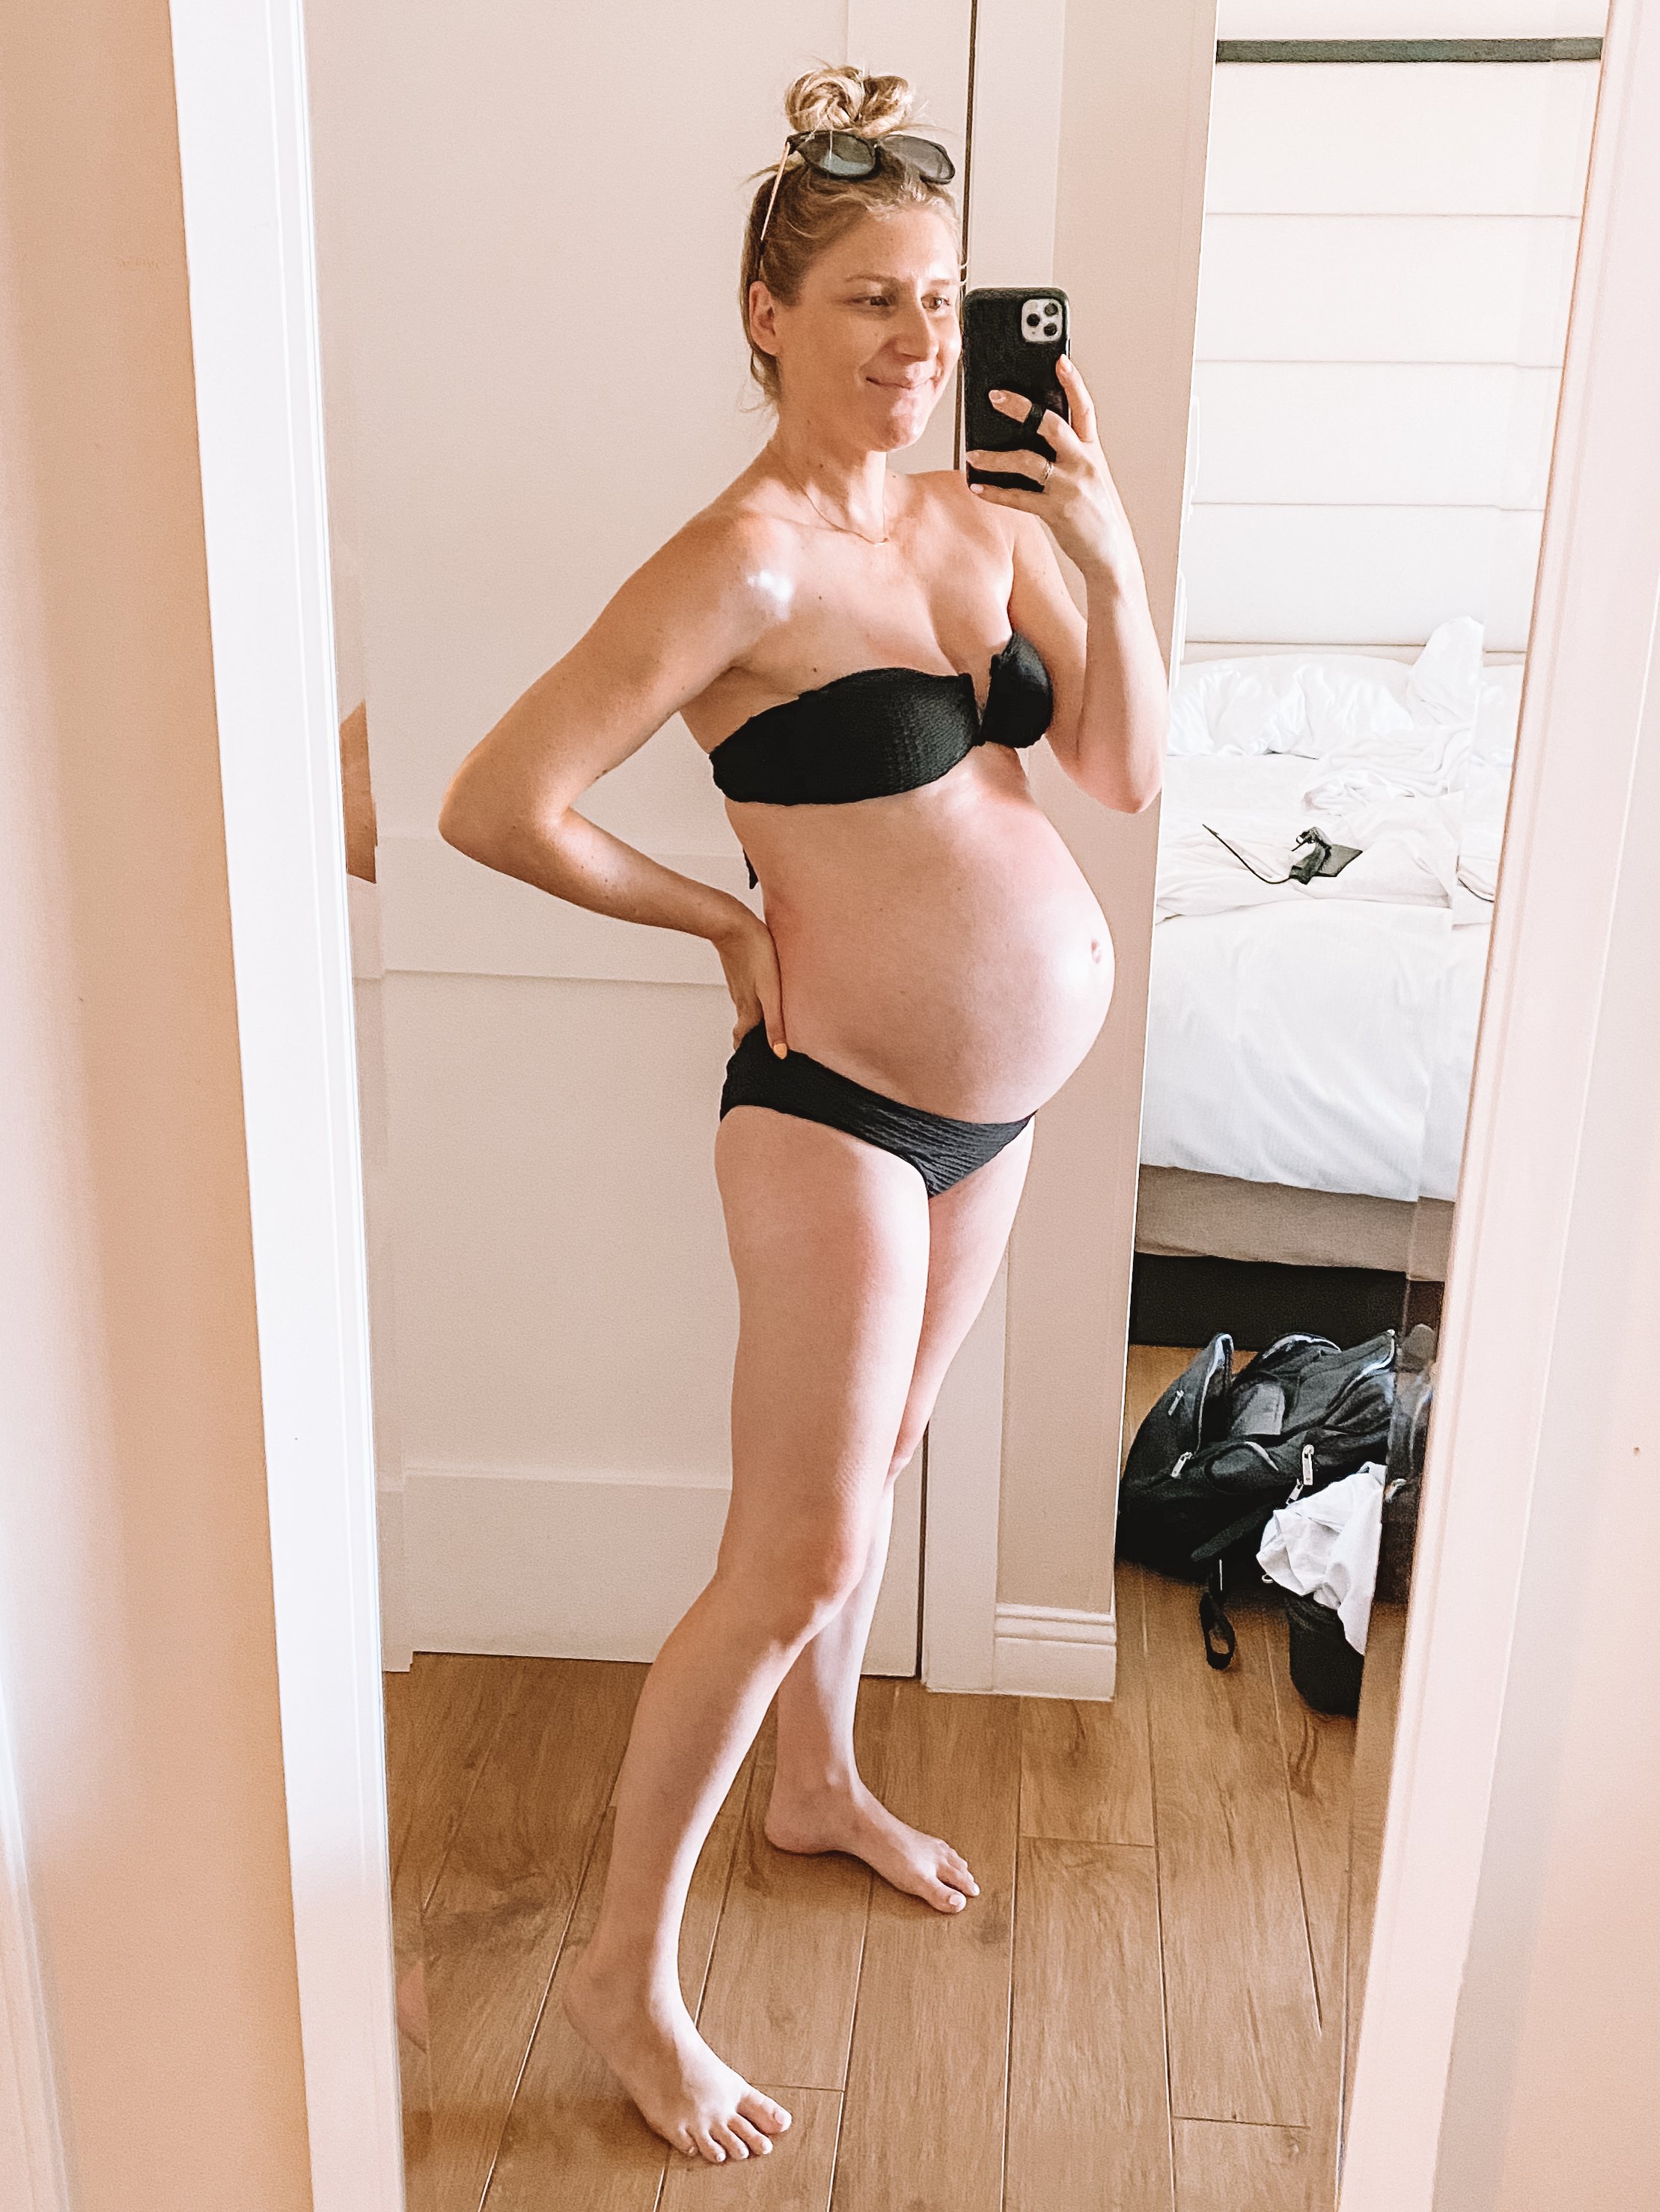 27 Weeks Pregnant Belly - Baby Bump